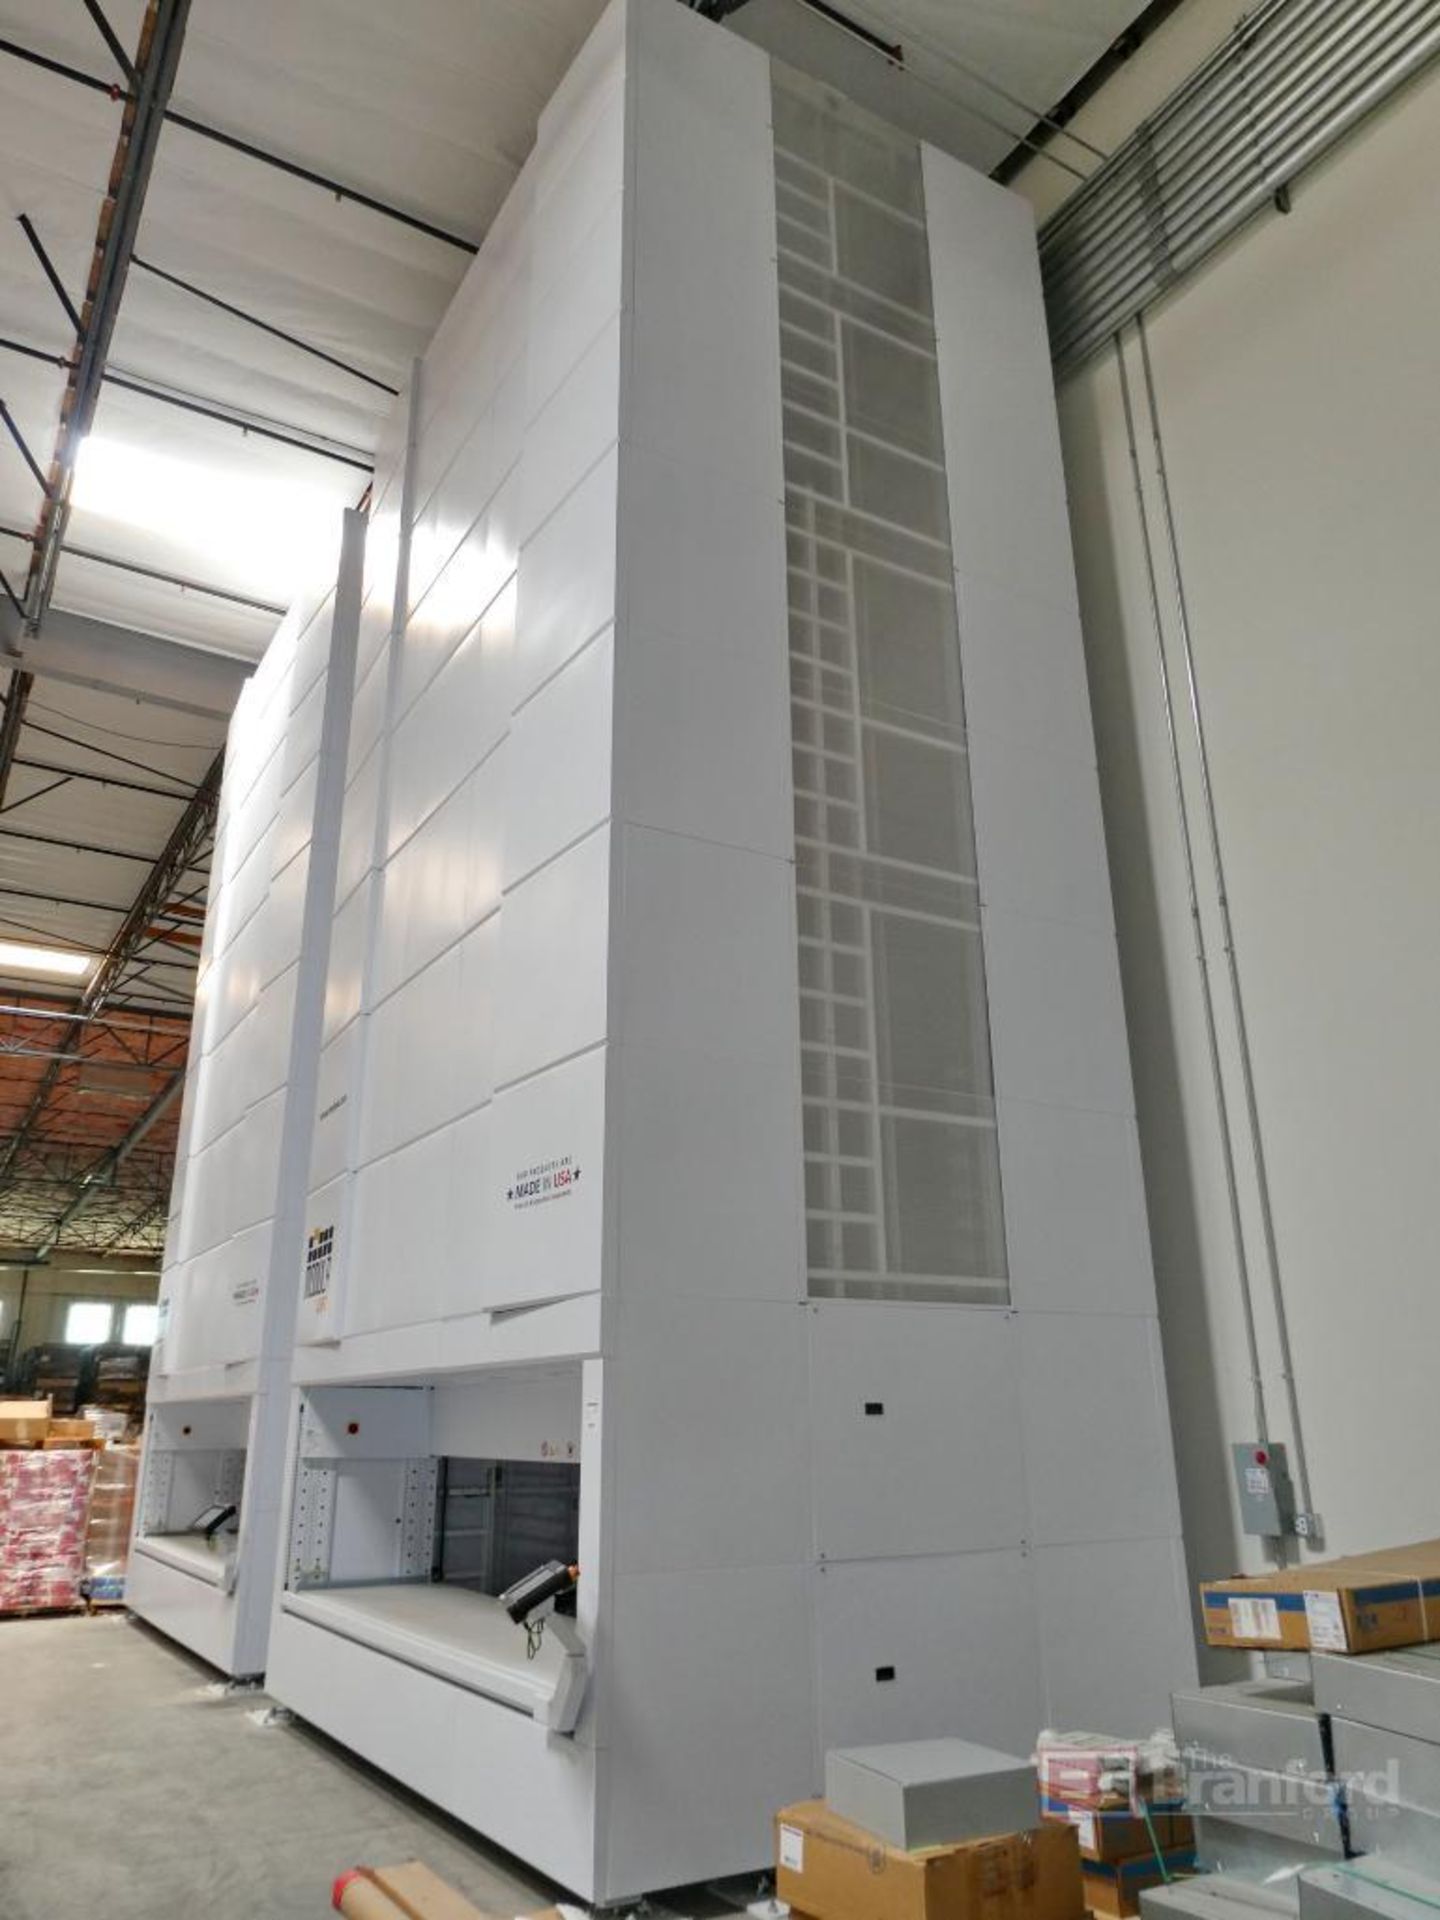 2021 Modula Lift Model ML50D, Automated Vertical Carousel Storage System - Image 2 of 10